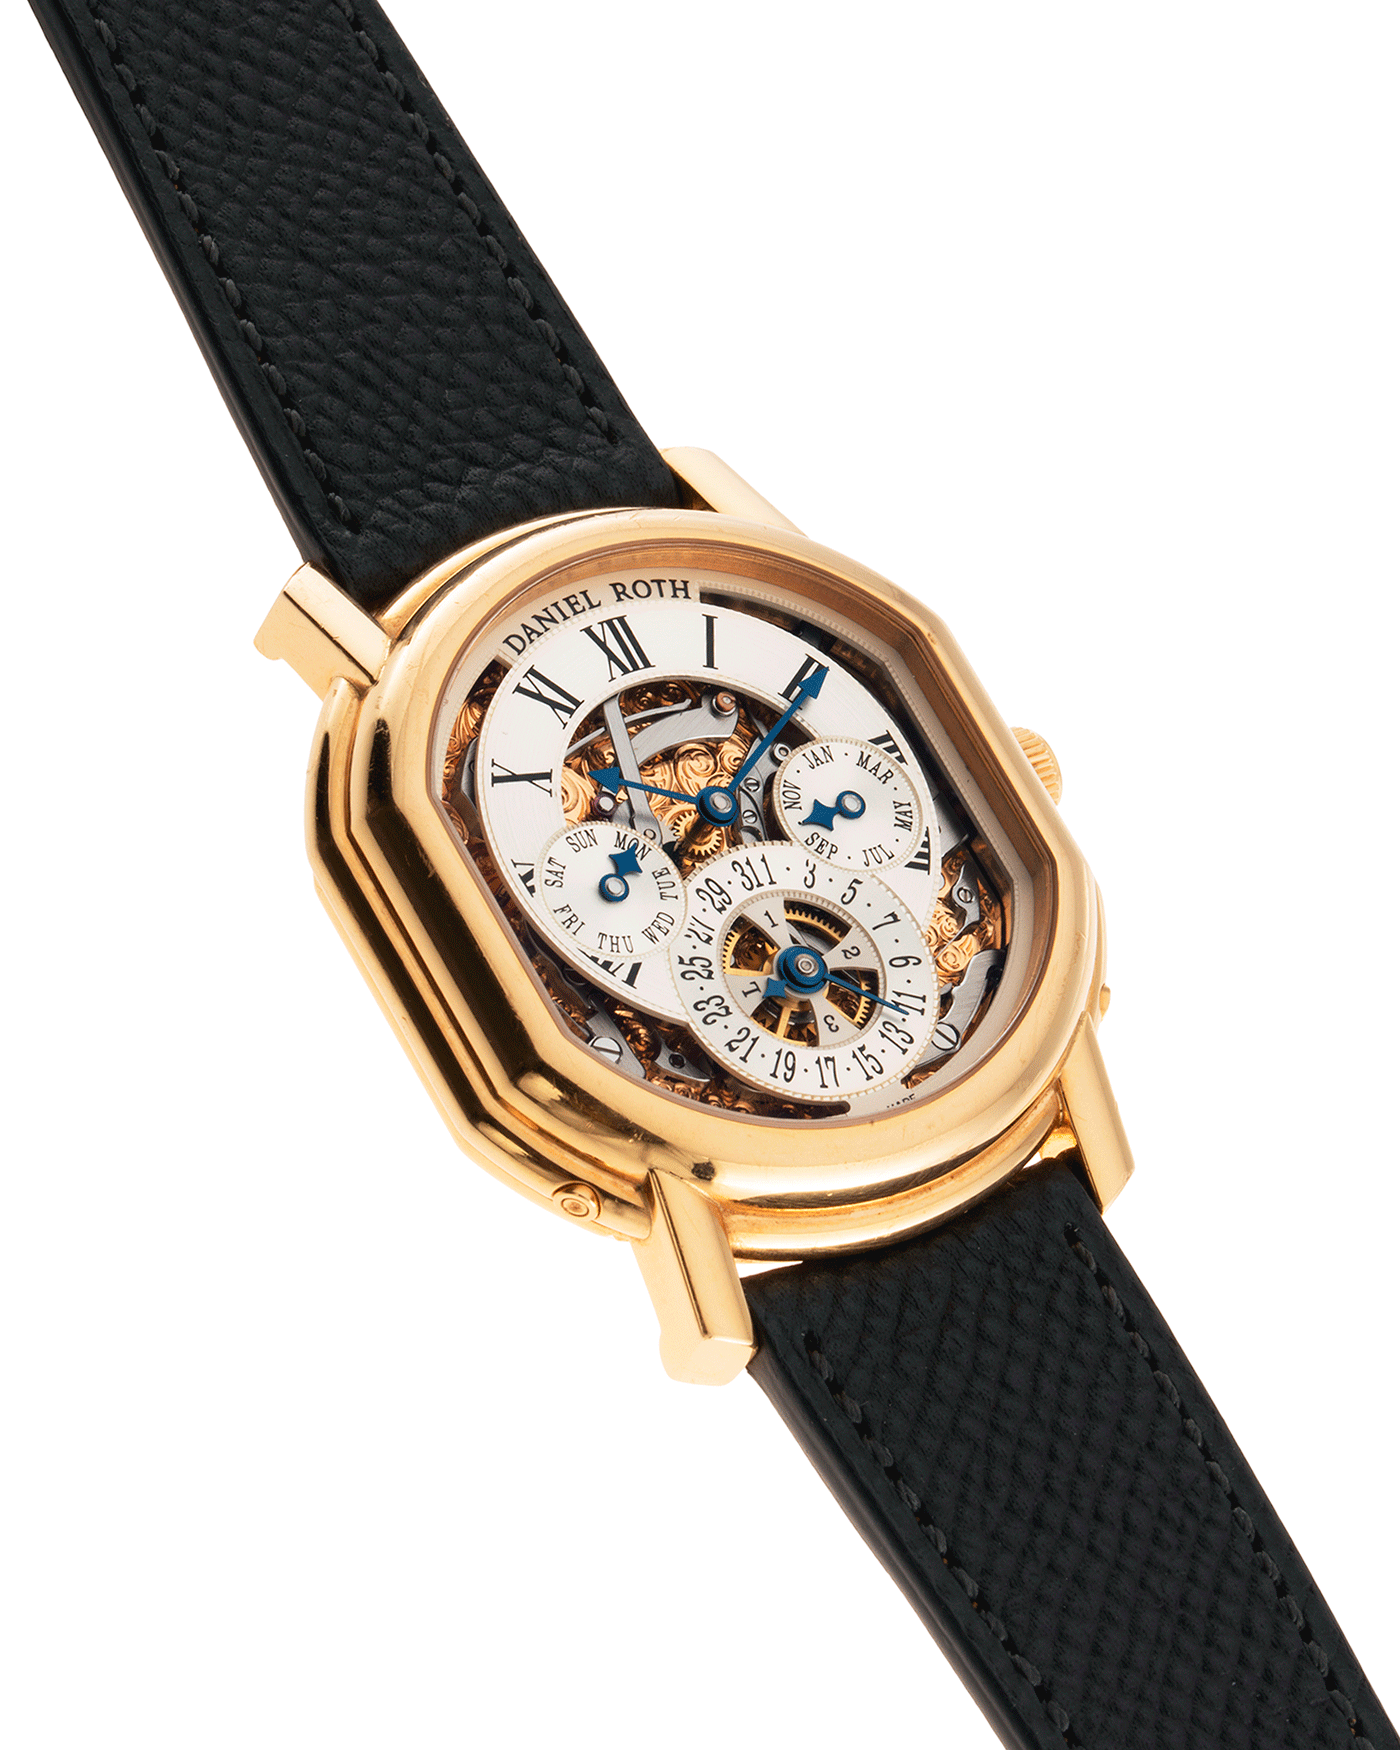 Brand: Daniel Roth Year: 1990’s Model: 119X40 Perpetual Calendar Skeleton Movement: Heavily Modified Lemania 8810 Material: 18k Yellow Gold Case Diameter: 38mmX41mm Bracelet/Strap: Molequin Anthracite Grained Calf with 18k Yellow Gold Tang Buckle